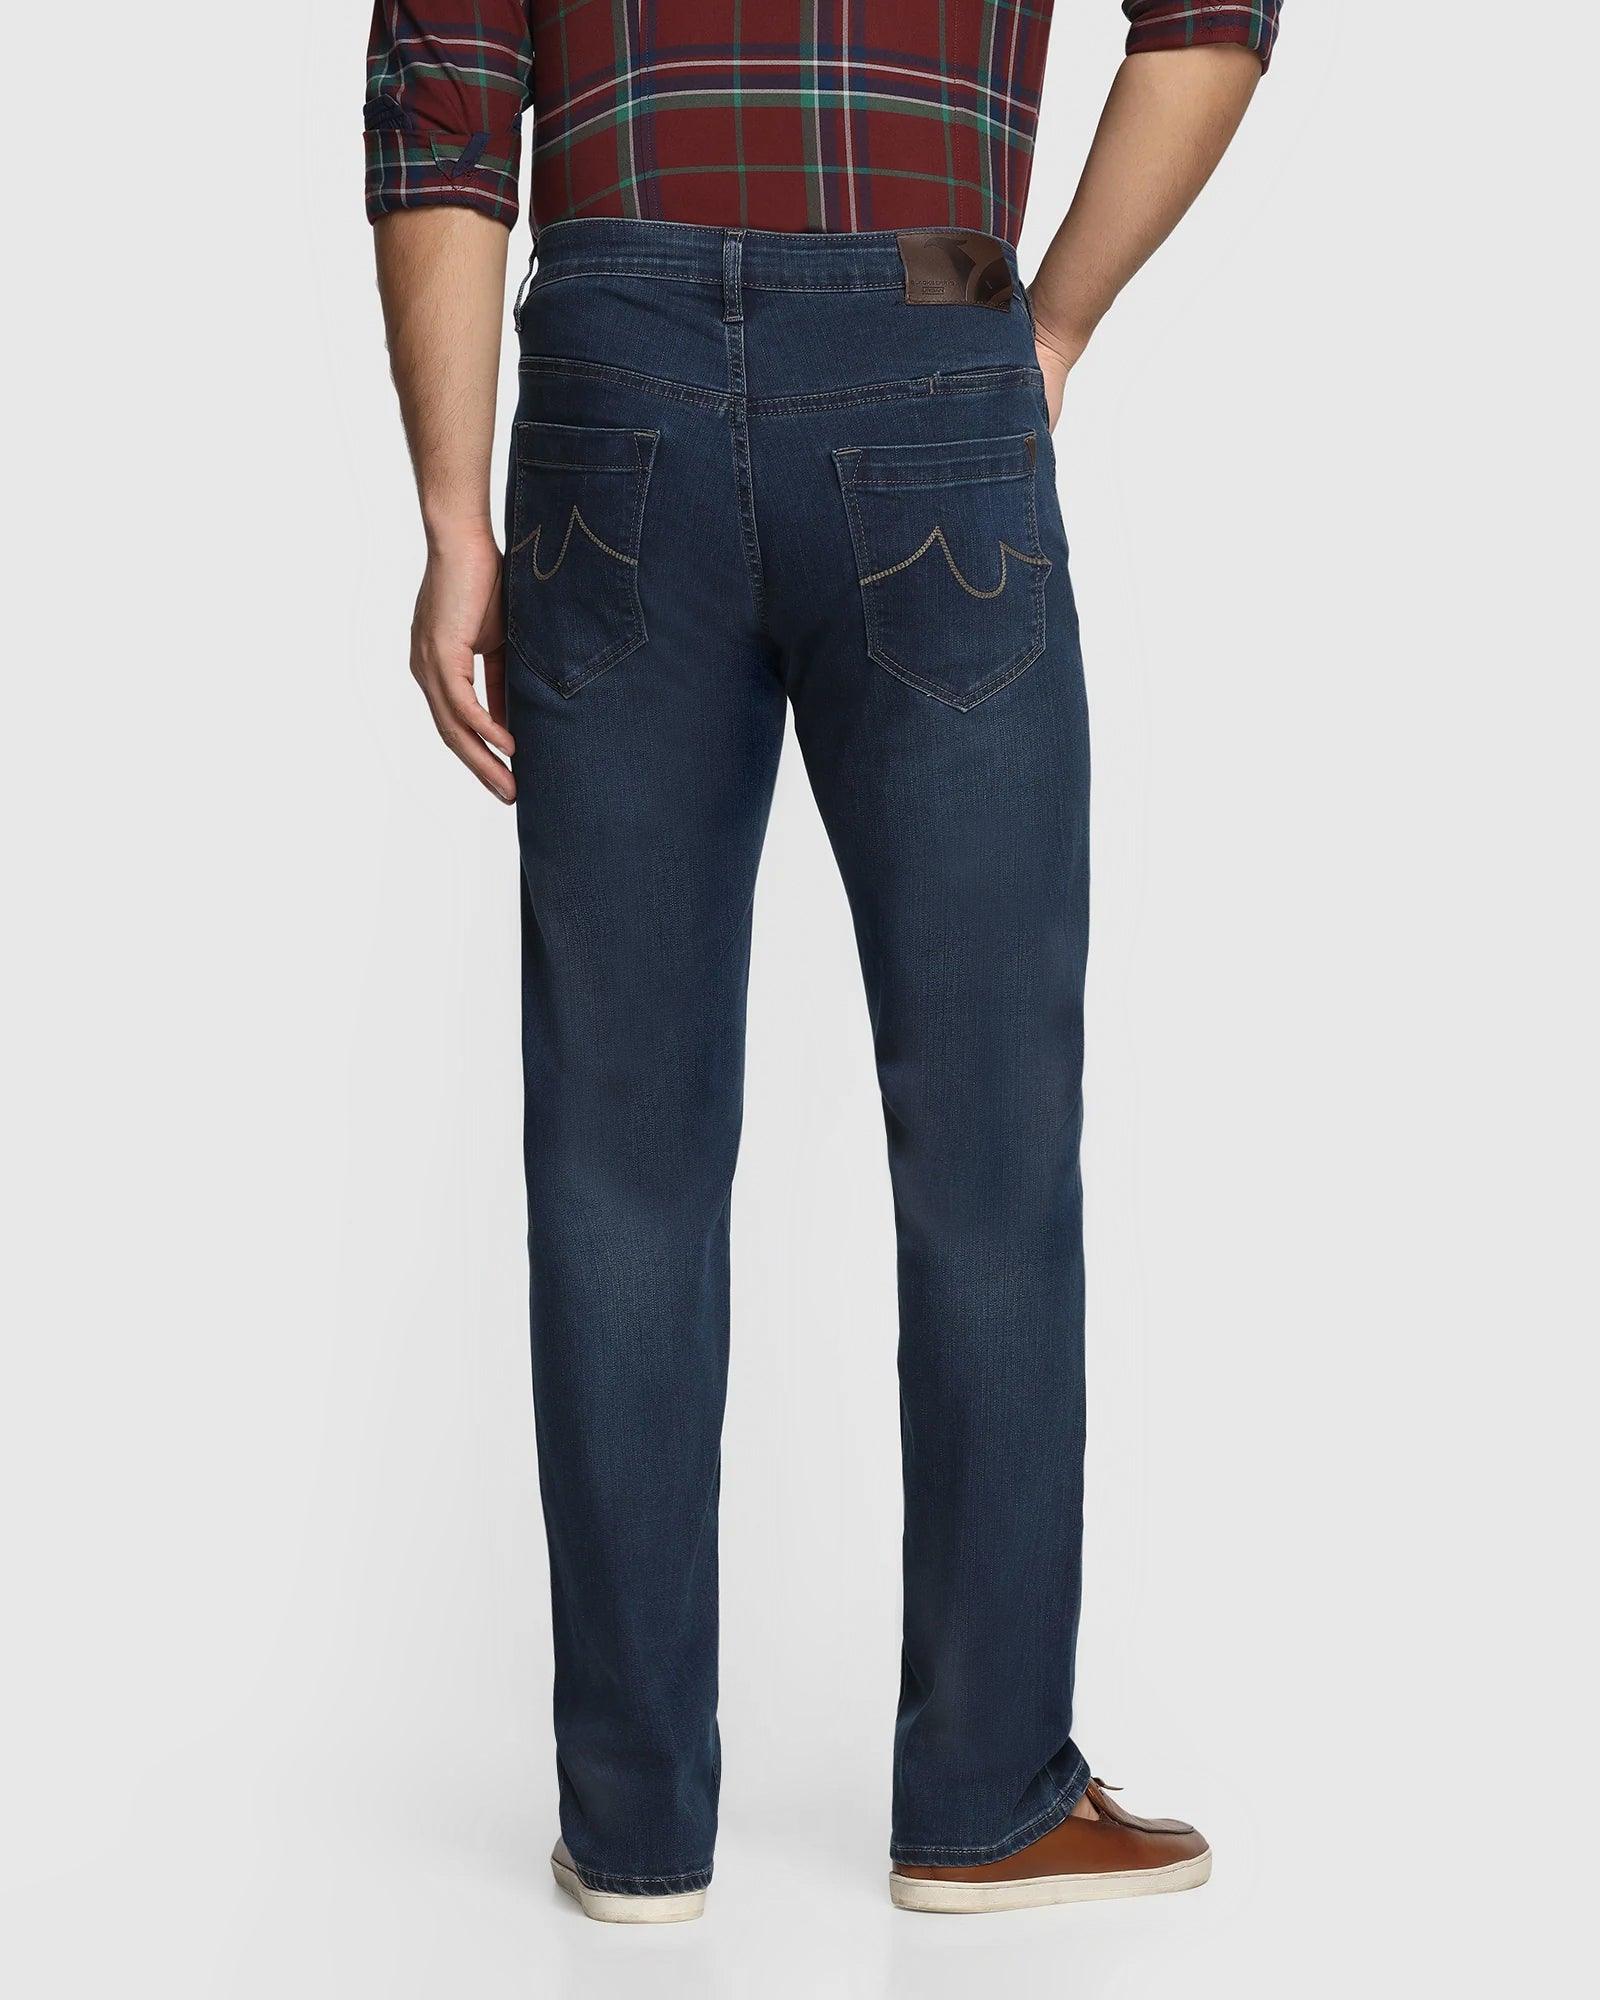 Super Clean Straight Comfort Duke Fit Indigo Jeans - Ted